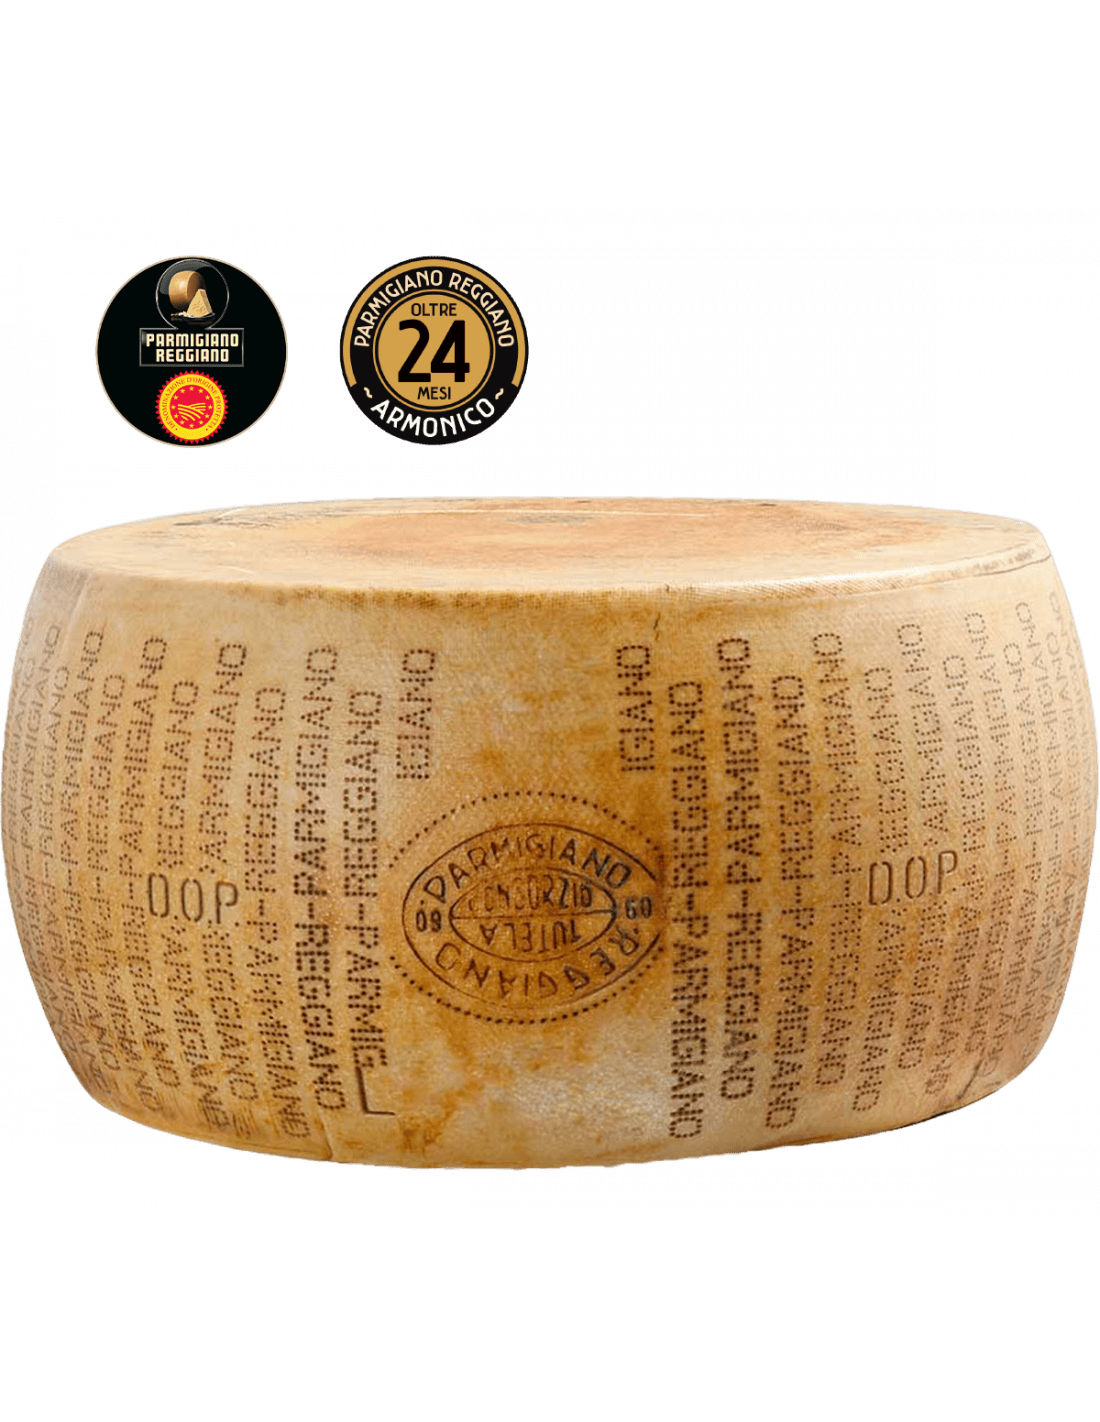 Form of Parmigiano Reggiano PDO from Collina 24 Months Weight 39 Kg